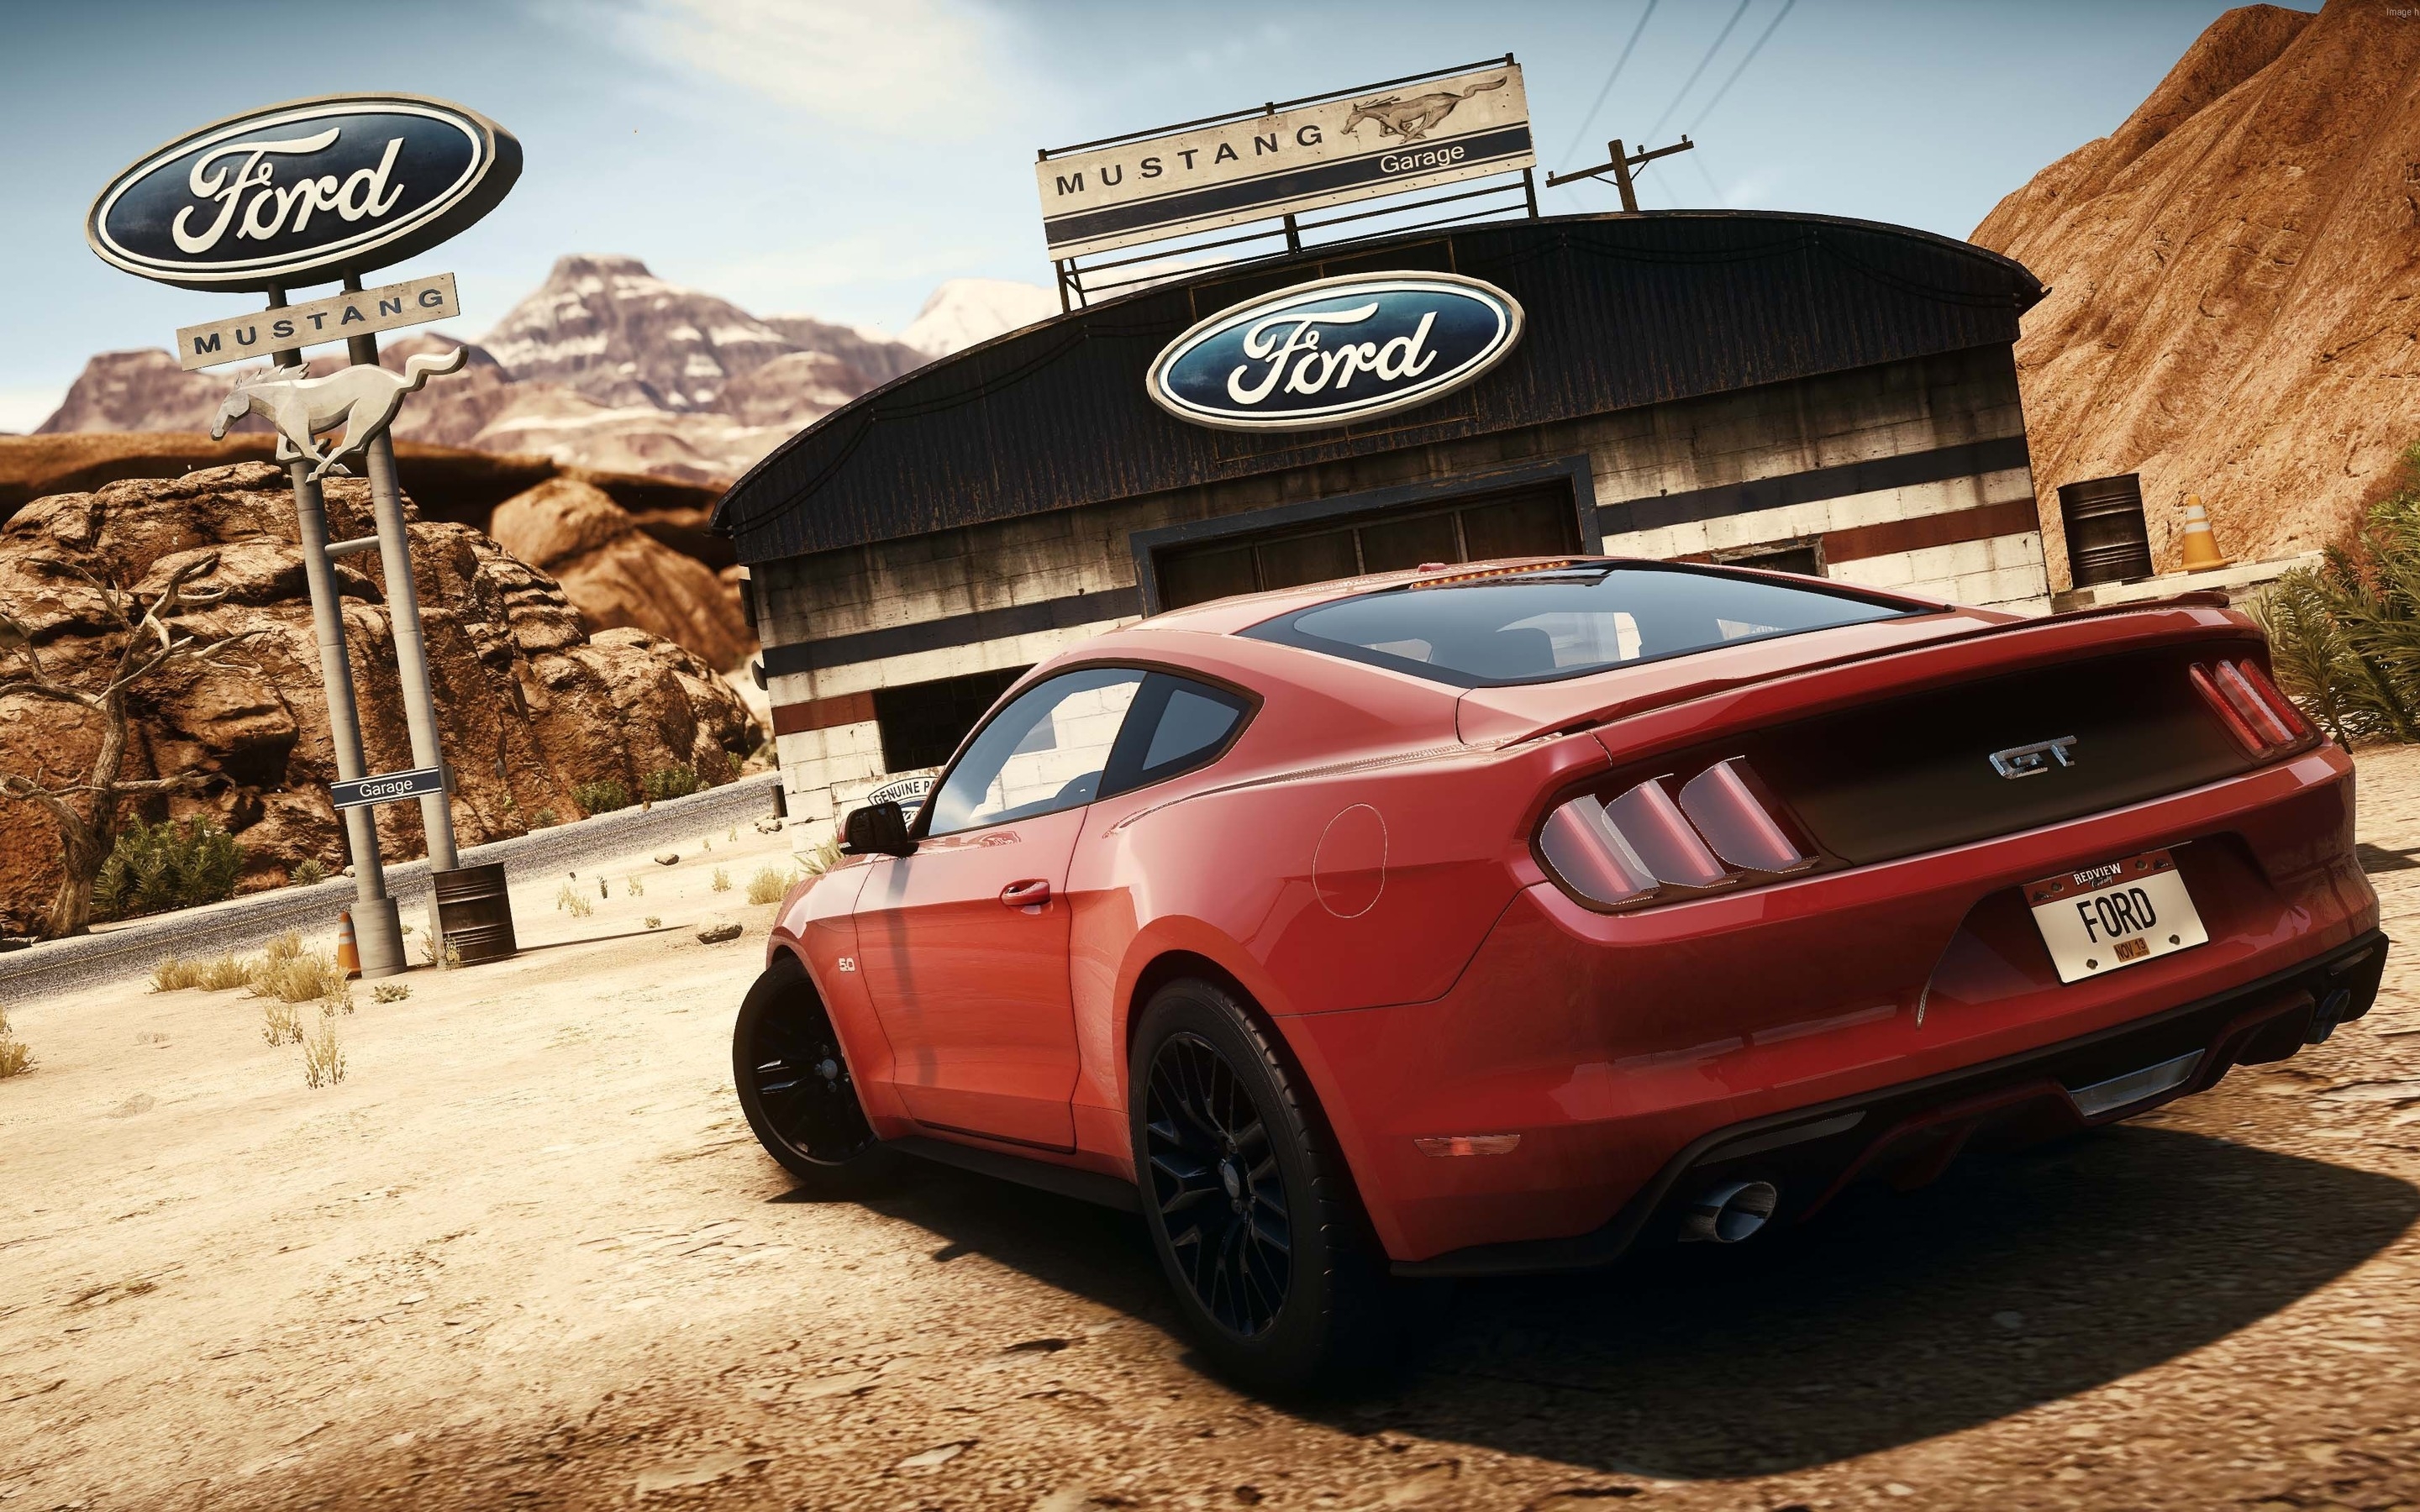 Need For Speed Ford Mustang for 2880 x 1800 Retina Display resolution